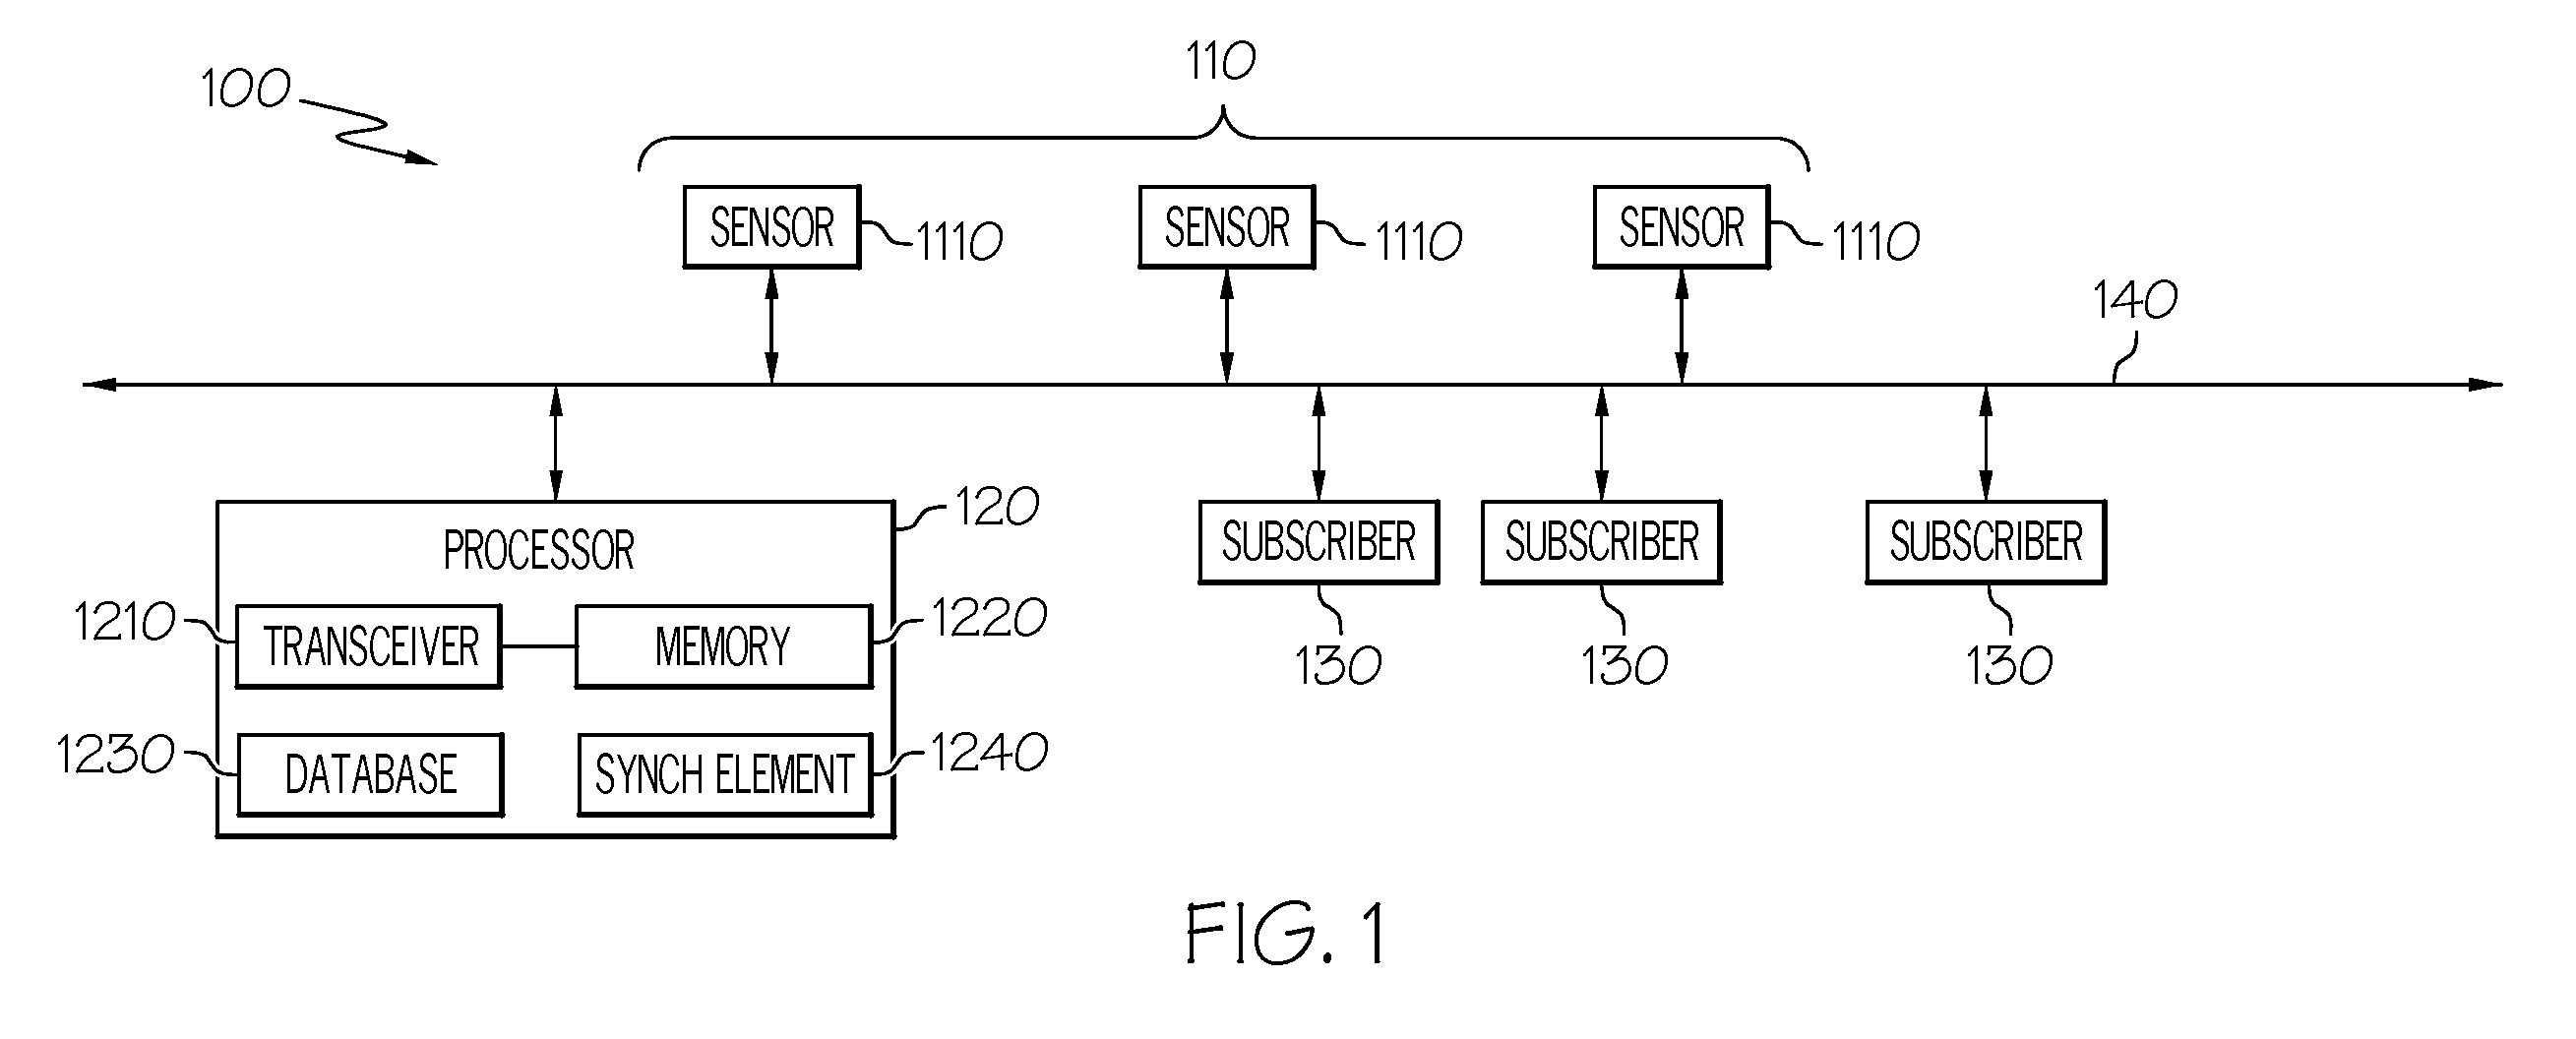 Systems and methods for publishing selectively altered sensor data in real time